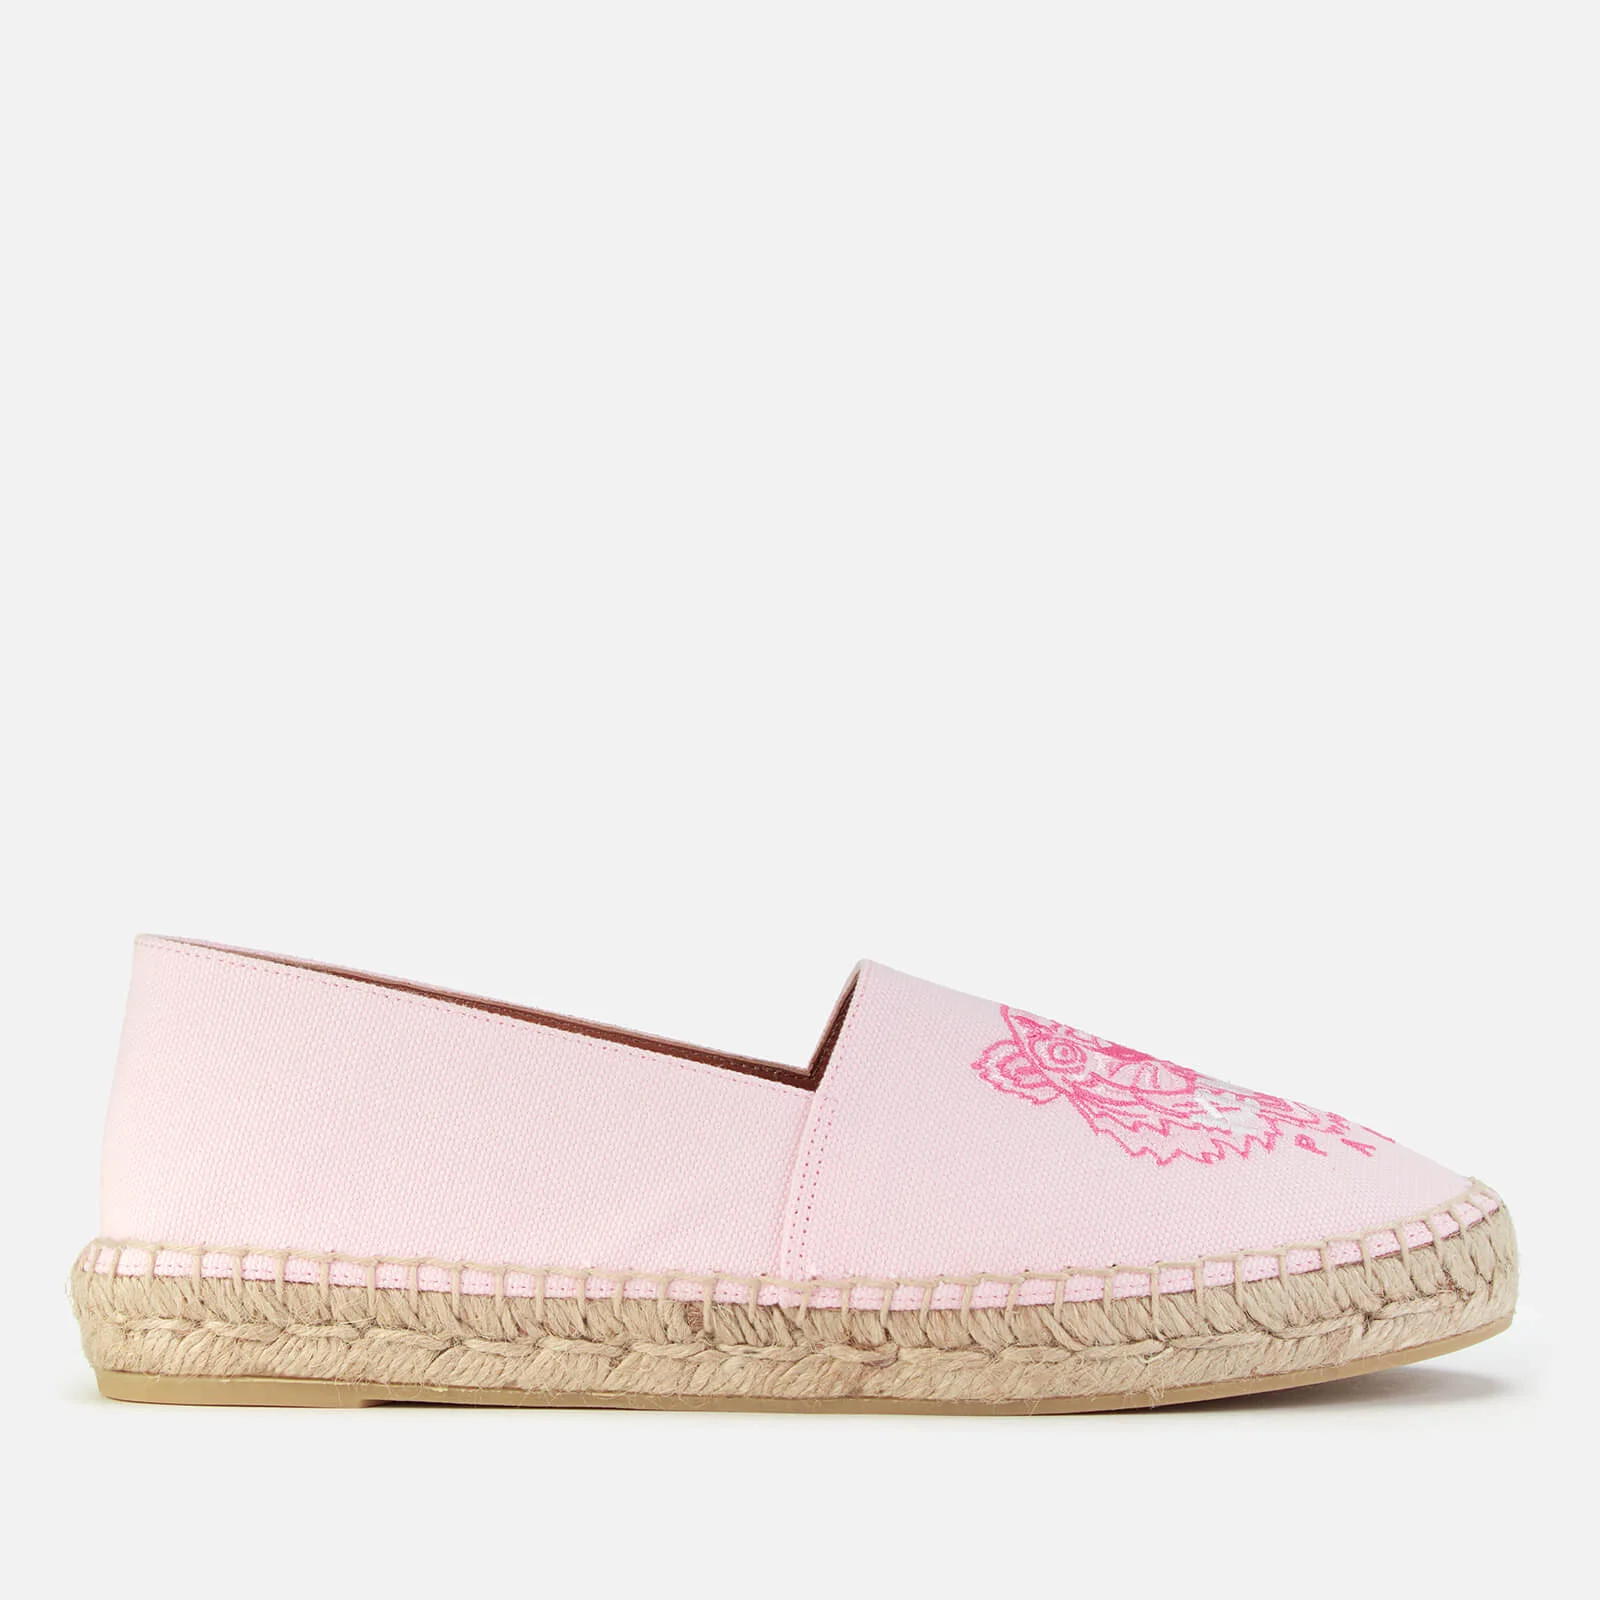 KENZO Women's Classic Tiger Leather Espadrilles - Faded Pink Image 1